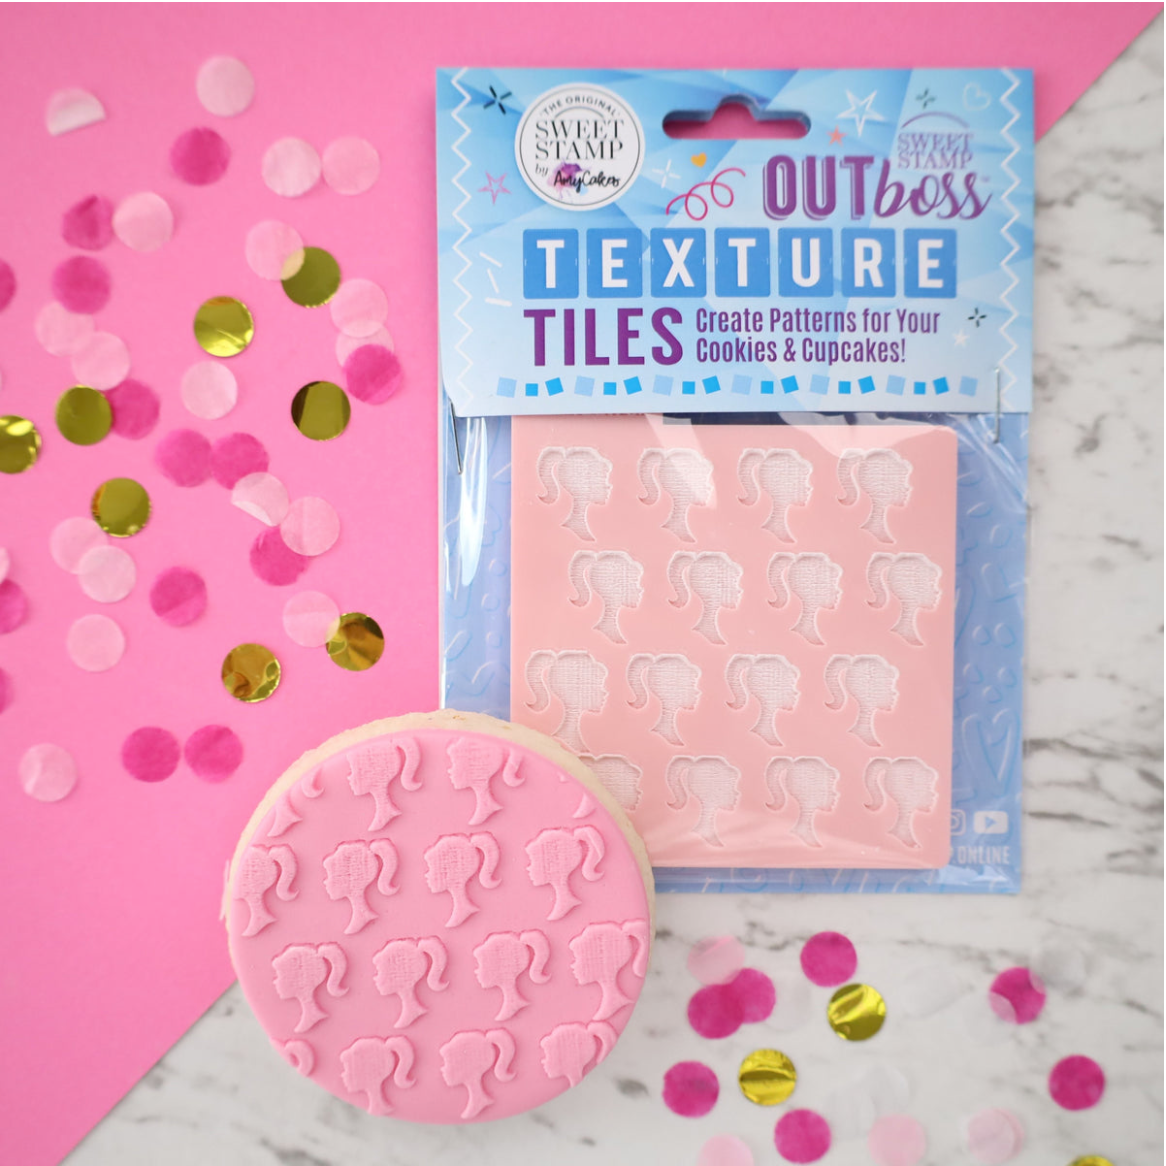 DOLLHOUSE MINI SILHOUETTE OUTBOSS TEXTURE TILES BY SWEET STAMP